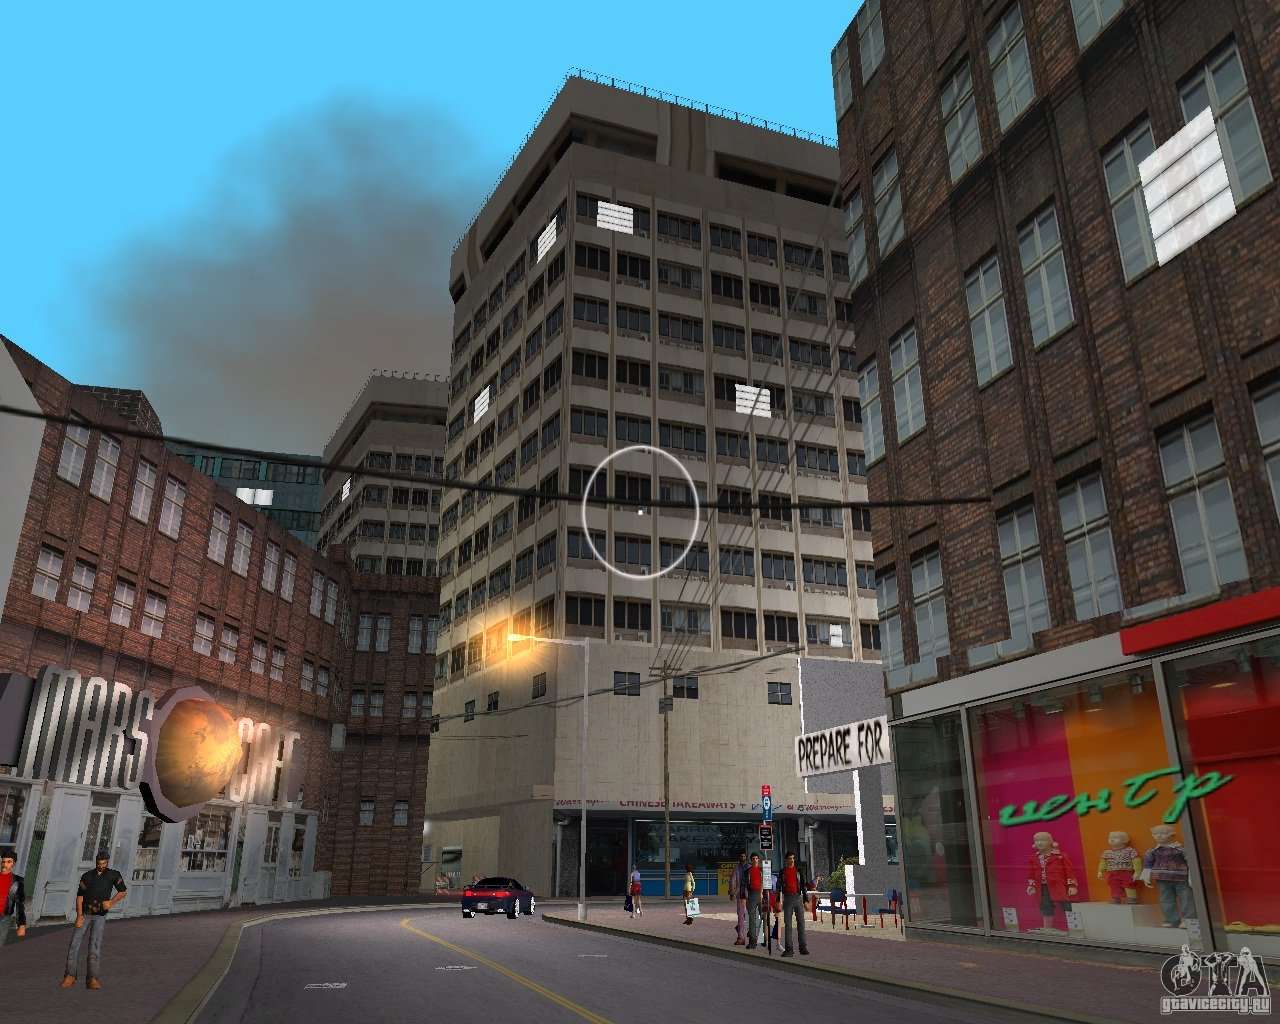 New Downtown: Shops and Buildings for GTA Vice City